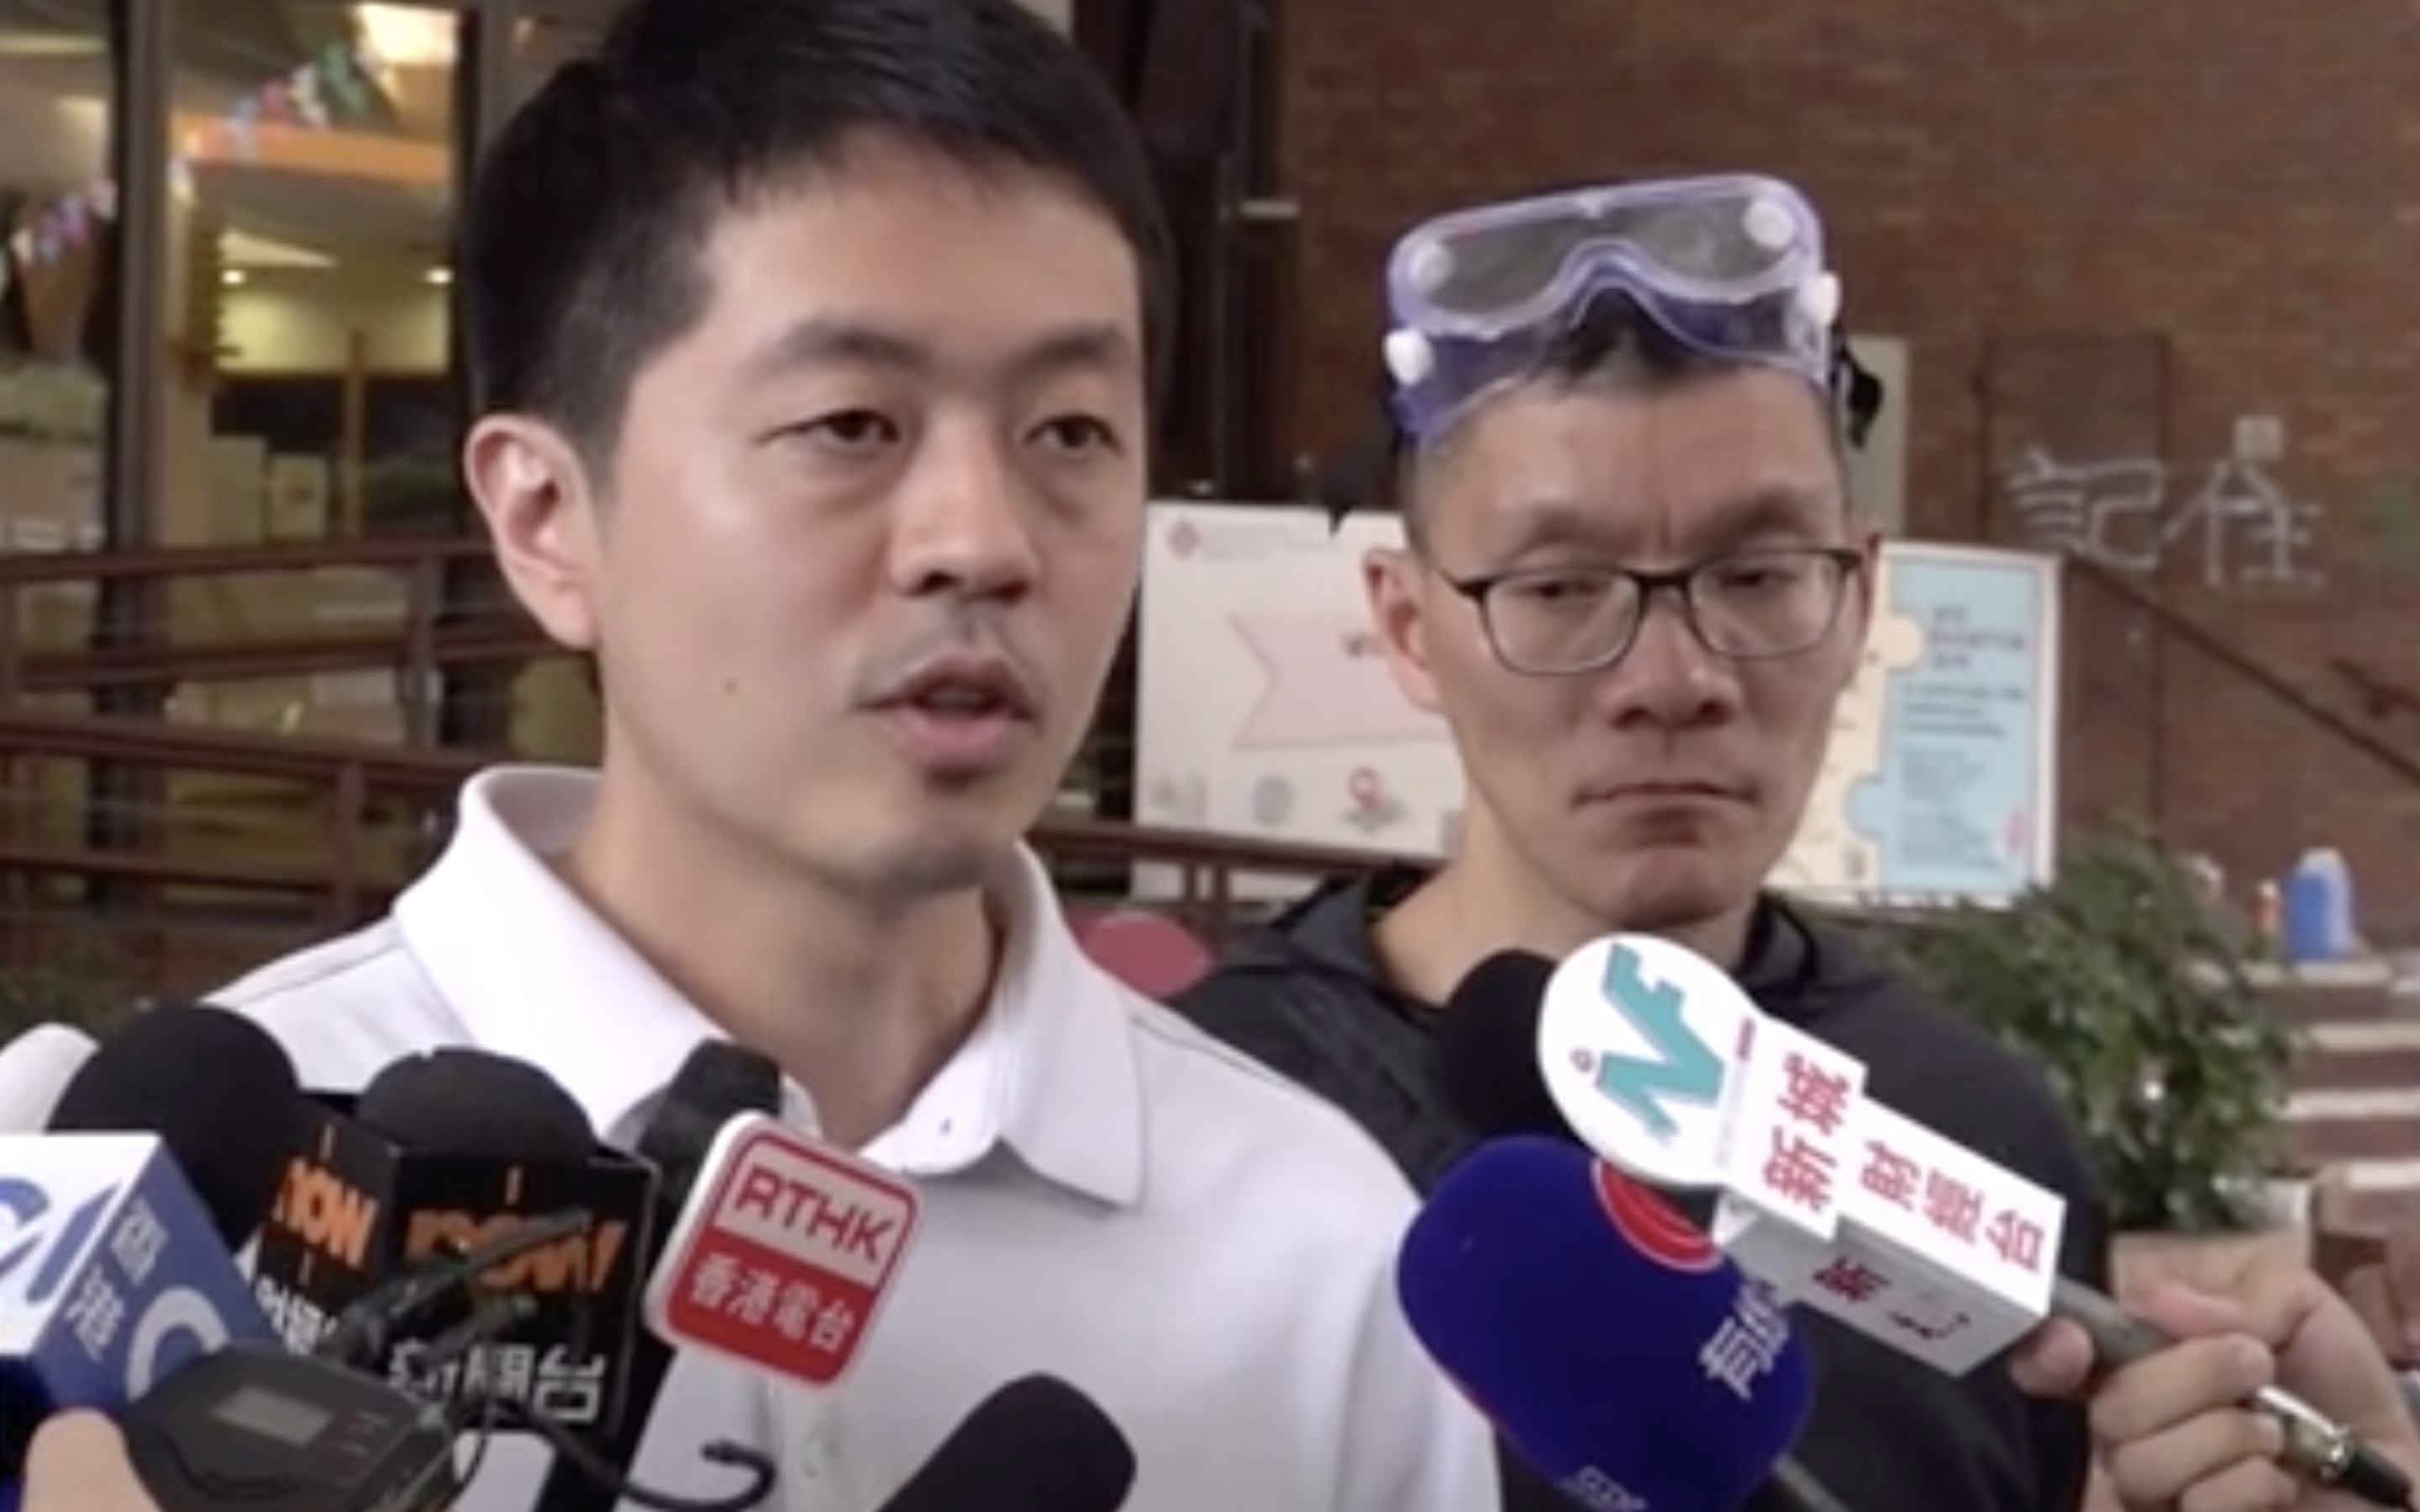 Pro-democracy lawmaker Ted Hui speaking to reporters ahead of him and dozens of protesters at Polytechnic University surrendering. Screengrab via Facebook.